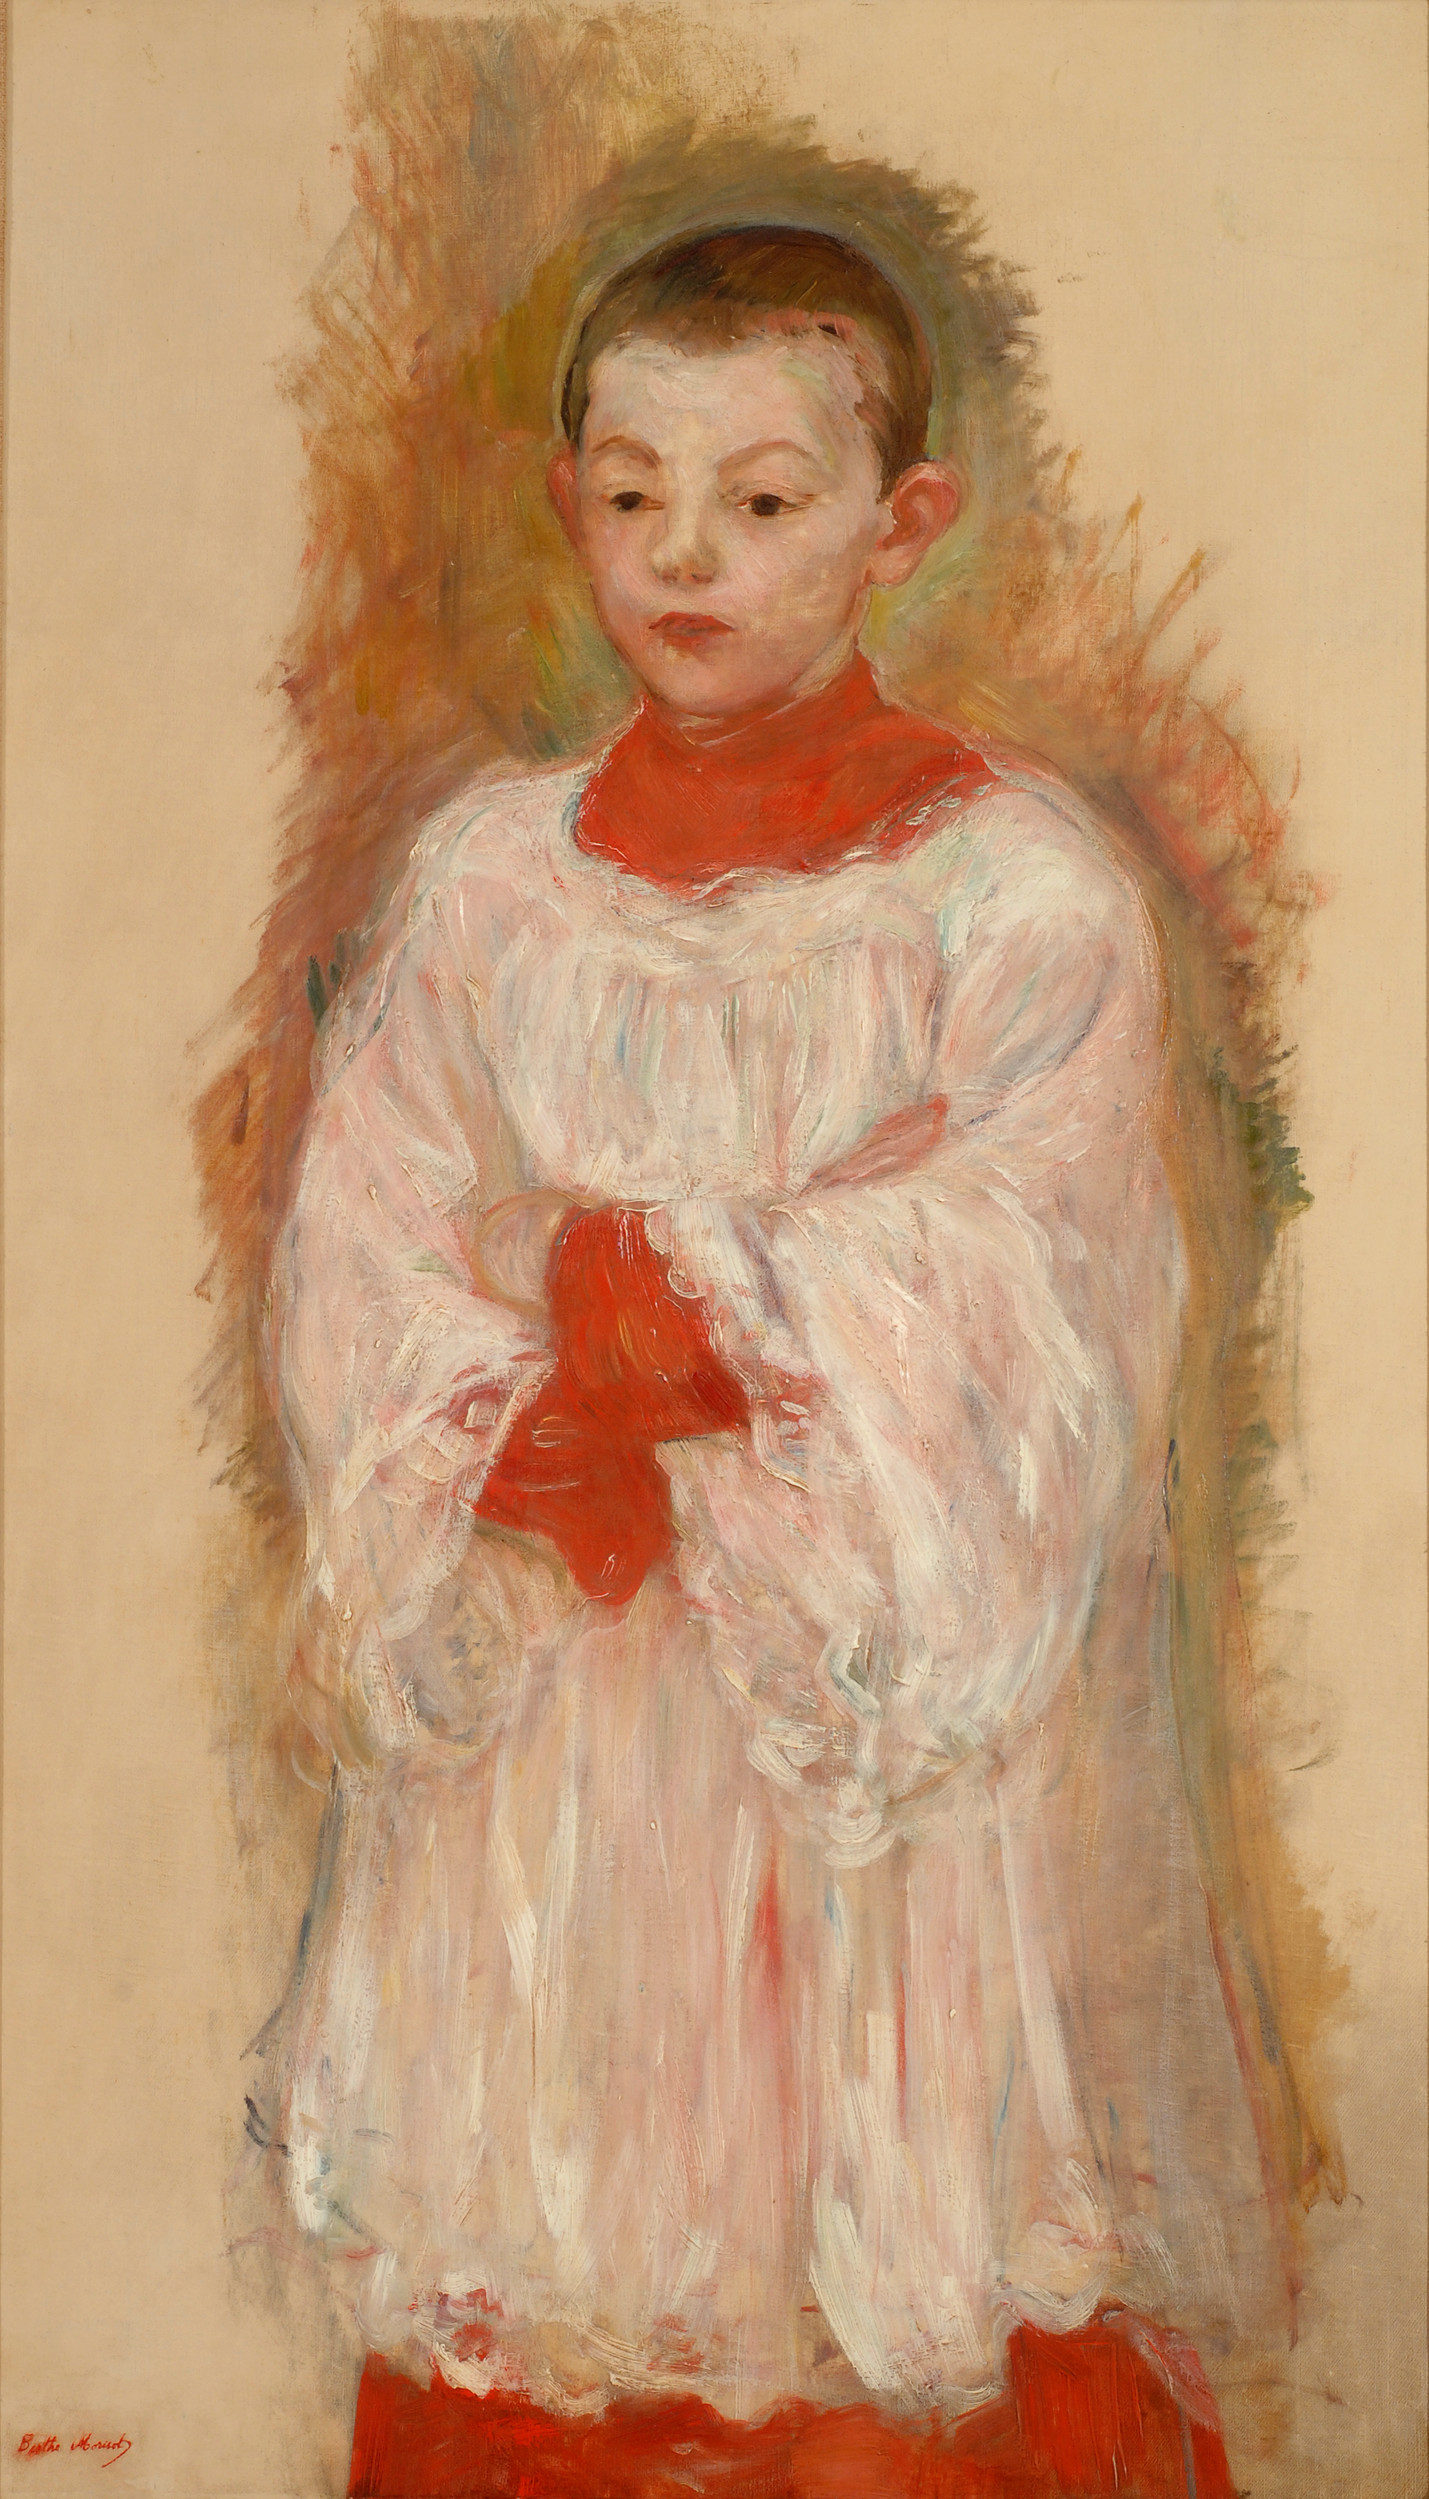 Impressionist painting of a choirboy. The young, light-skinned boy is has very short brown hair and wears a red, high-collared, long, under layer with a white long-sleeved layer over it. His arms are crossed and the background is a plain canvas.